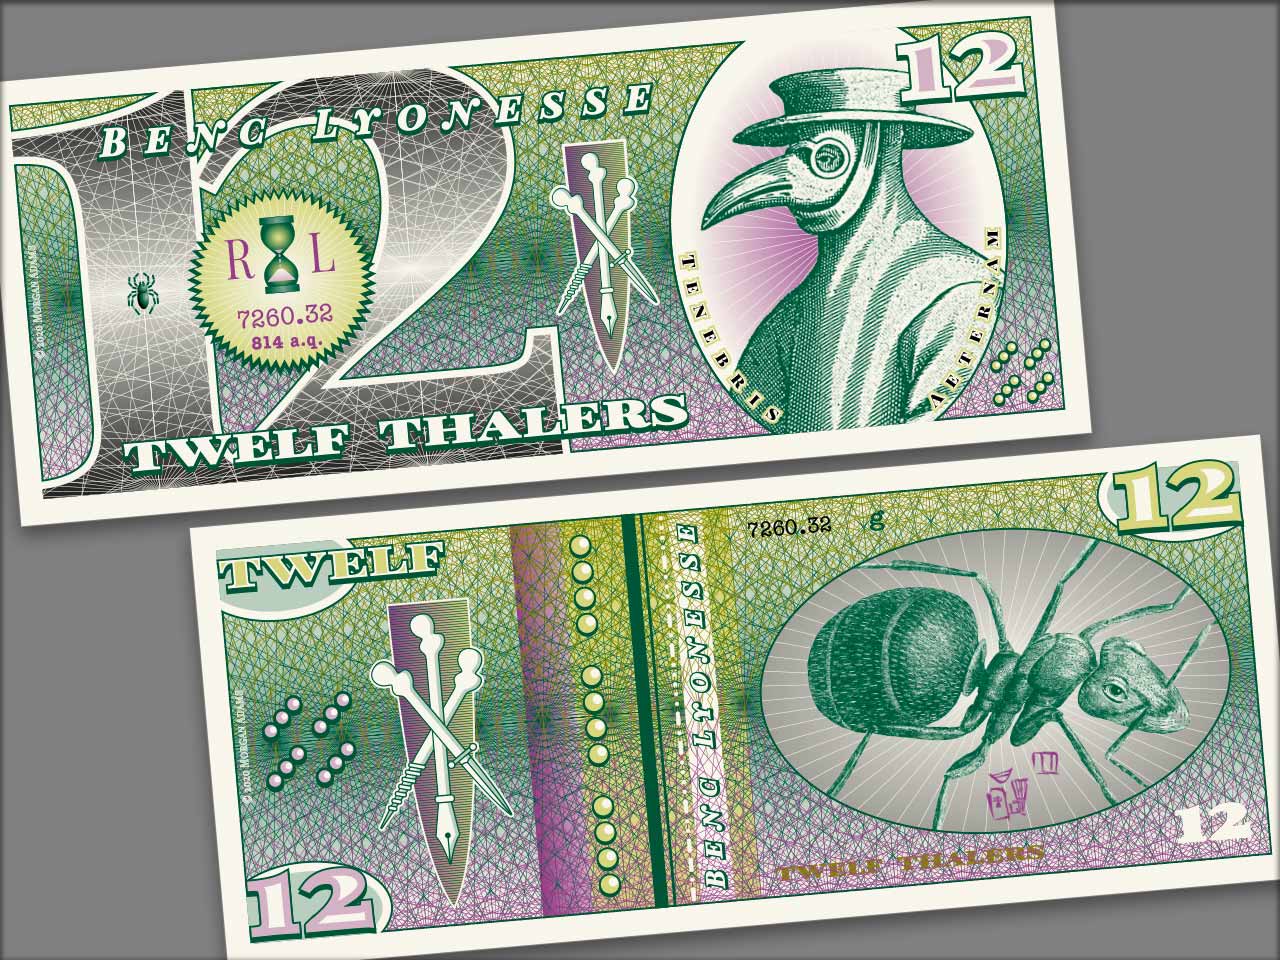 Twelf Thalers fictional currency